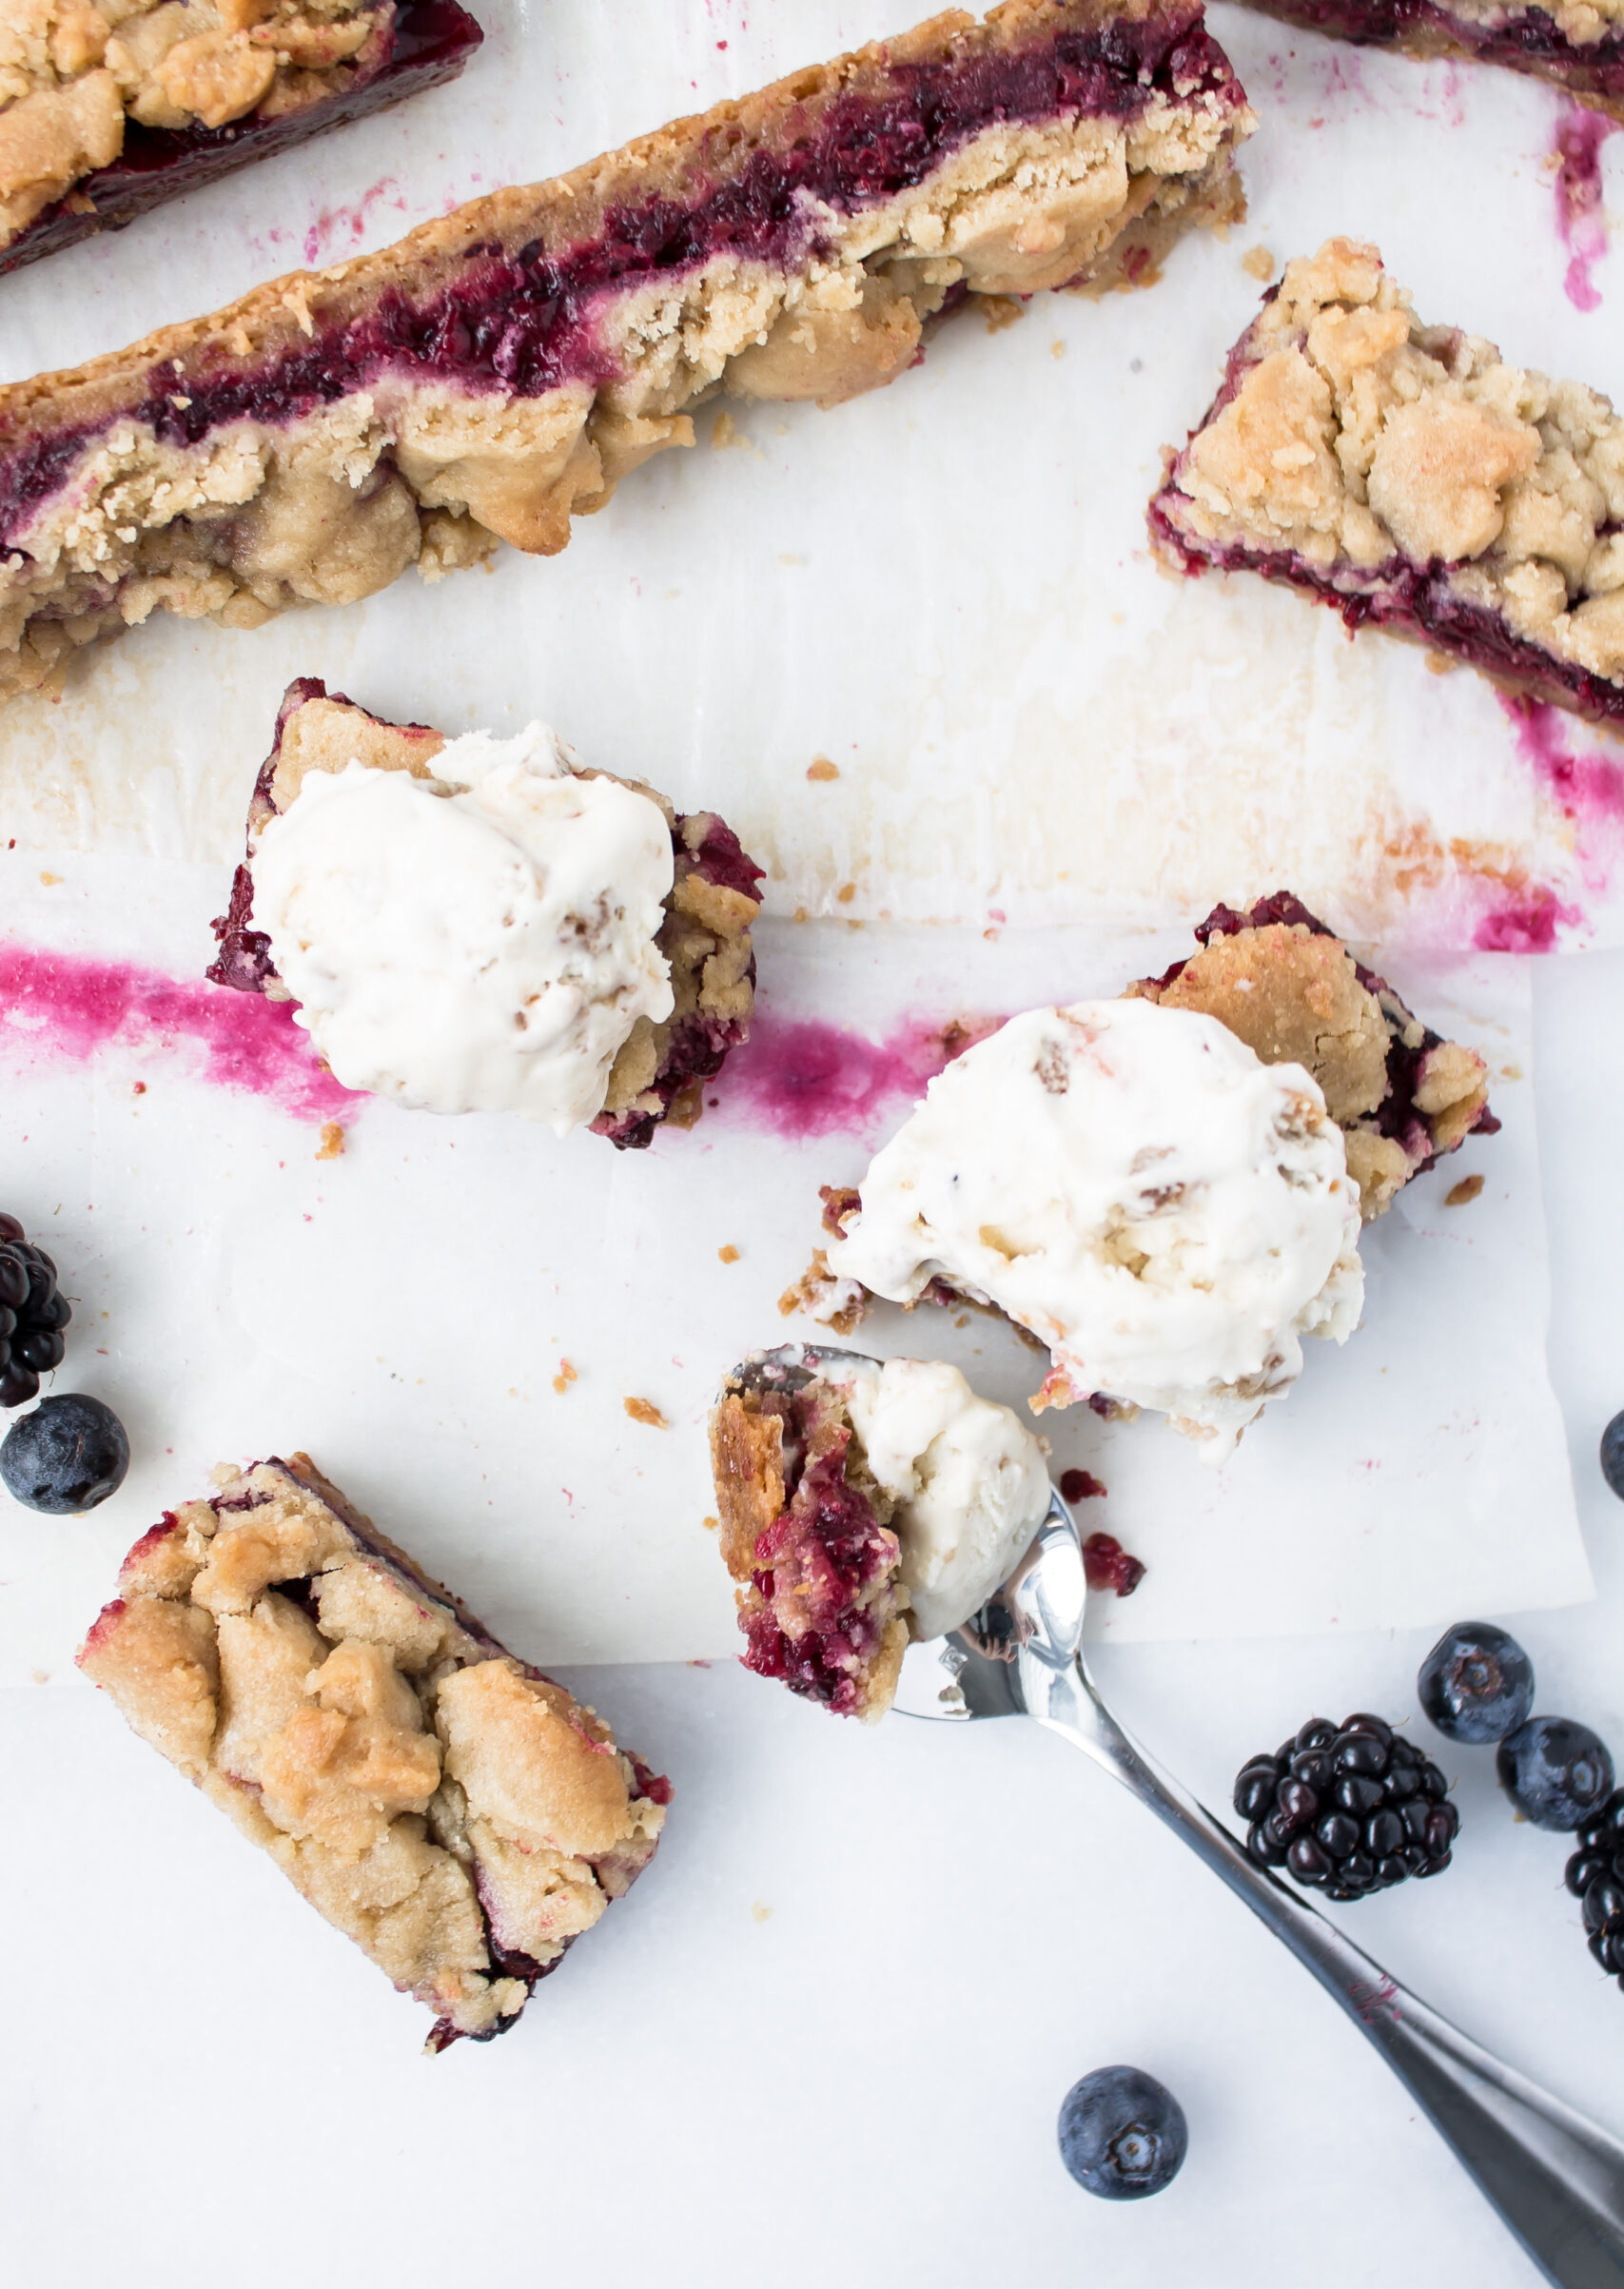 These blackberry and blueberry pie bars are basically a delightful crumb pie in bar form. The bars have a decadent shortbread base, a layer of sweet and jammy blueberries and blackberries, and a buttery, crumble topping. Perfect for a brunch or portable dessert for a party! | @glitterinclexi | GLITTERINC.COM